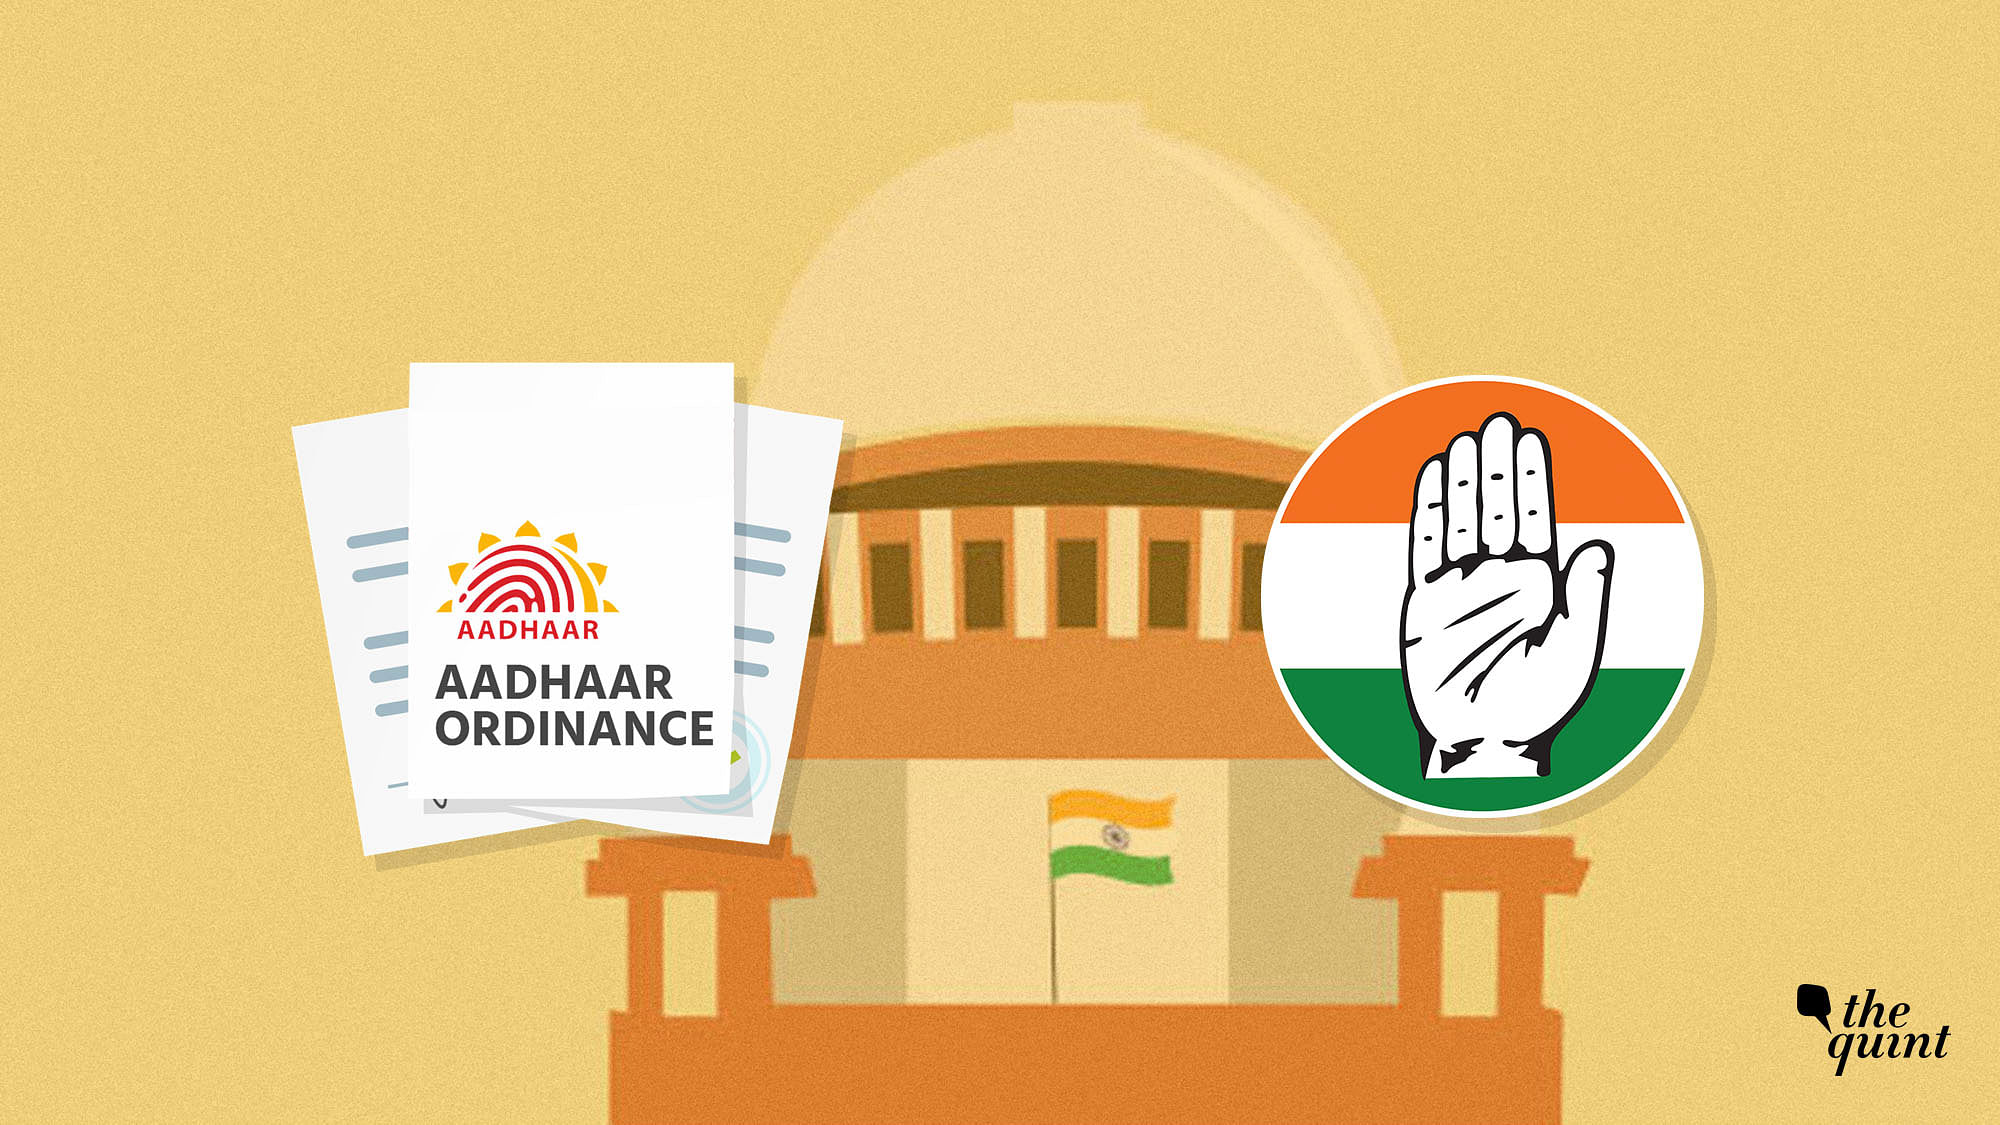 The Congress big data analytics head told Asia Times in an interview that the Aadhaar ordinance will be challenged in a writ petition in the Supreme Court on 5 April.